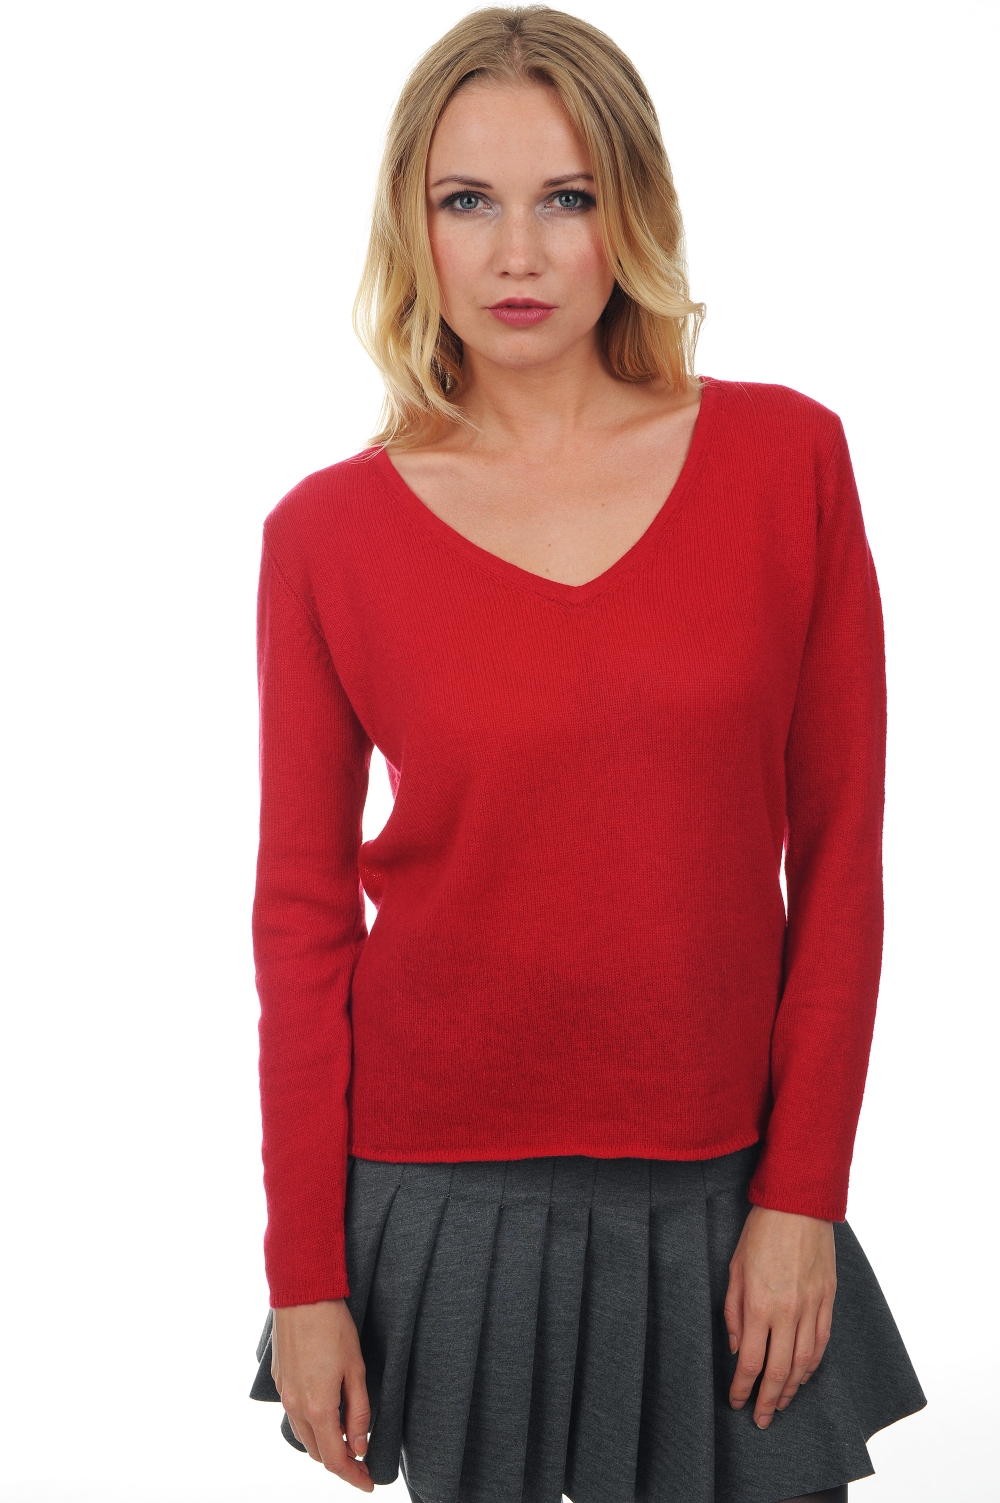 Cashmere ladies basic sweaters at low prices flavie blood red l